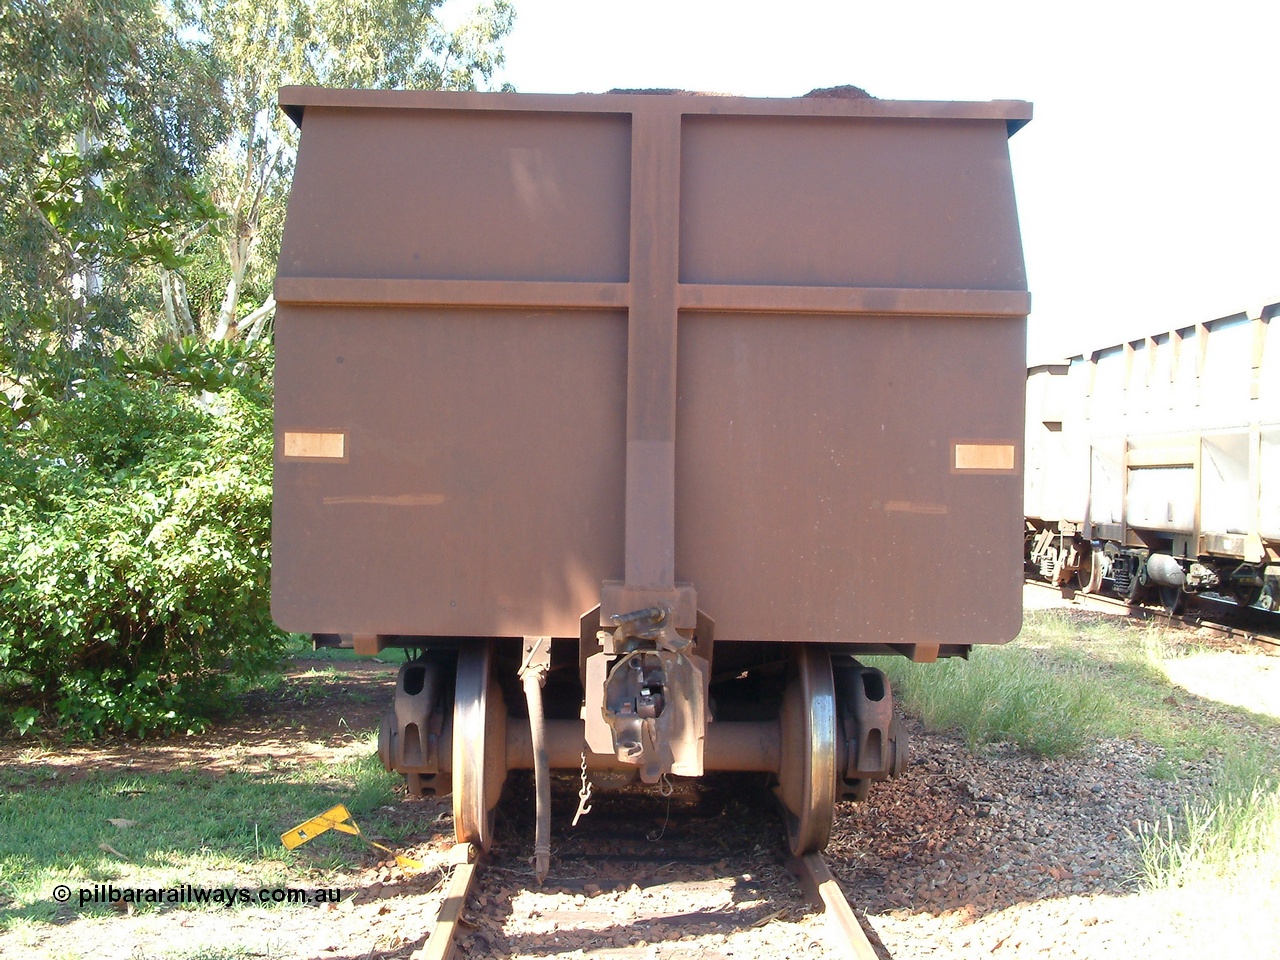 040412 144321
Nelson Point, Goninan built, Lynx Engineering designed ore waggon known as Golynx waggons, one of 345 such waggons constructed during 2001 out of 3CR12 stainless steel in an effort to eliminate painting and to reduce wear on the waggon body. 12th April 2004.
Keywords: Goninan-WA;Golynx;BHP-ore-waggon;